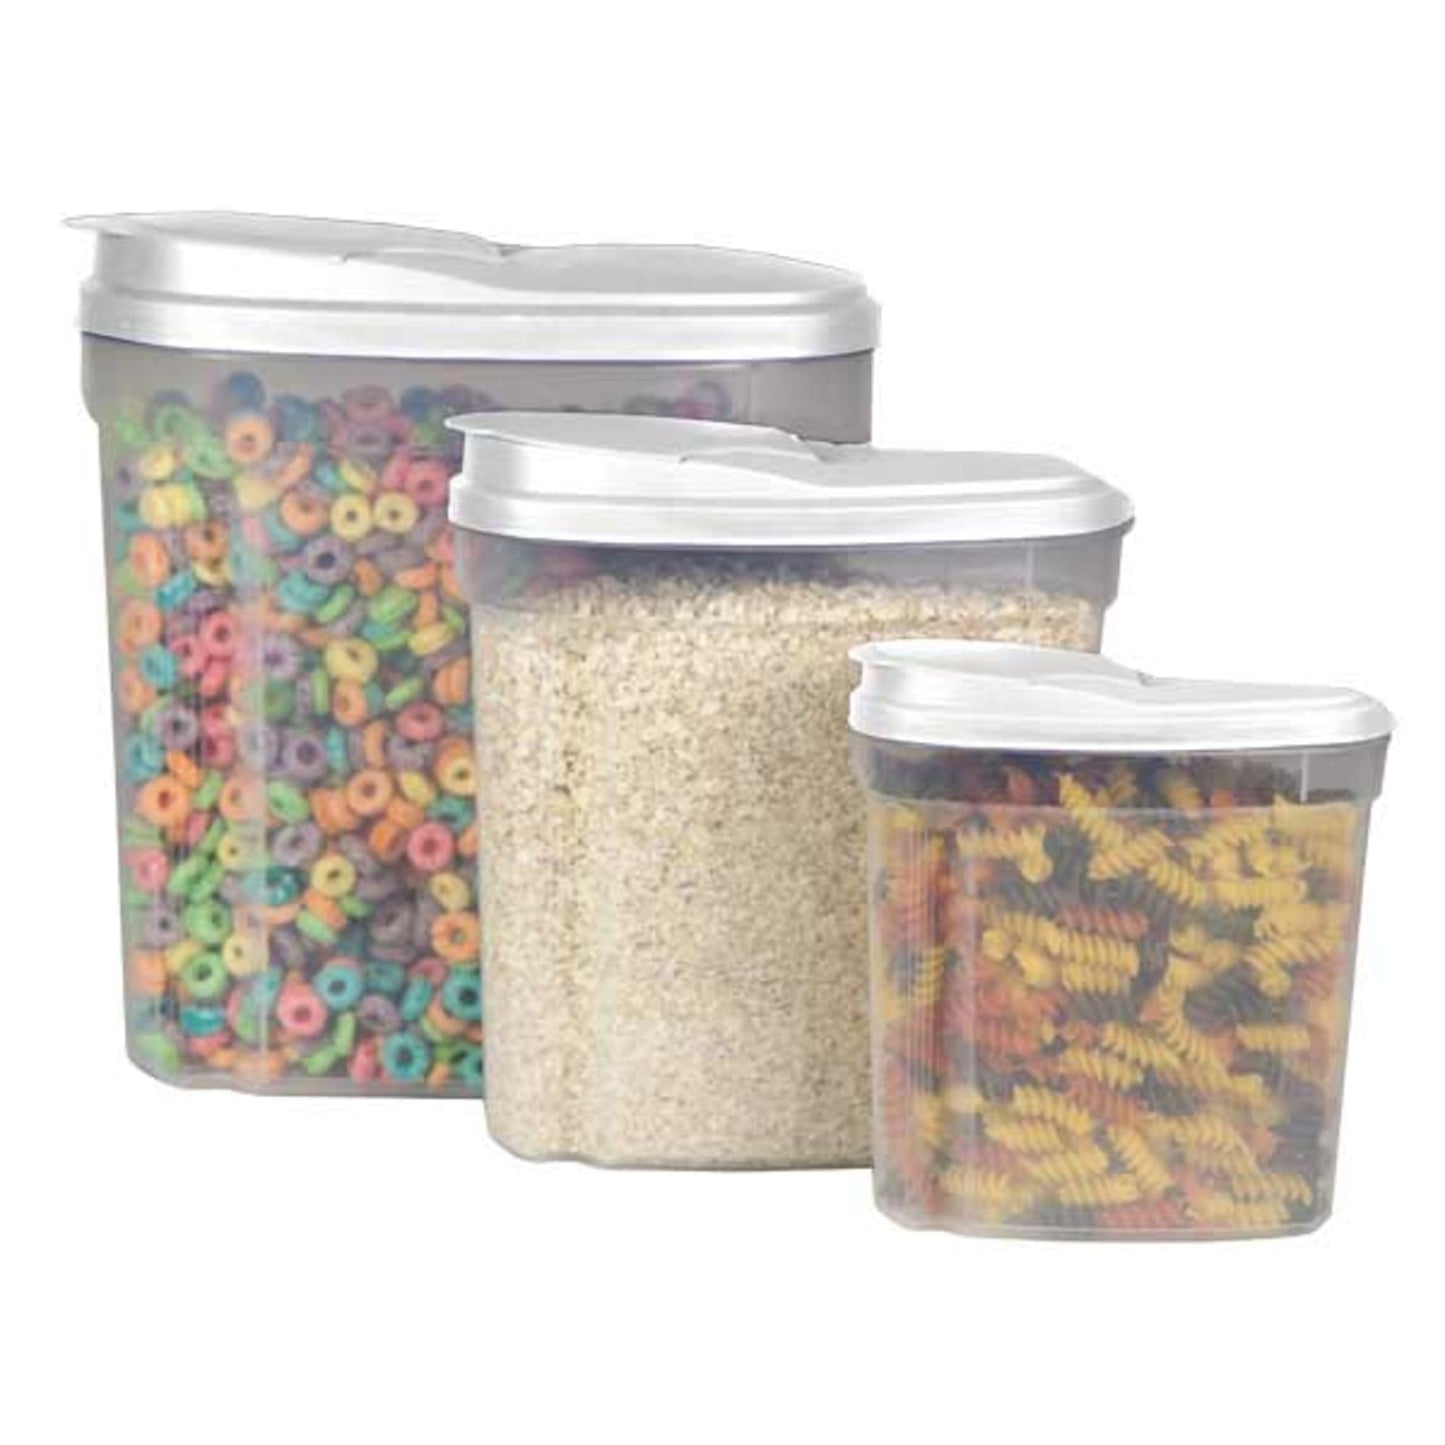 1 Set 28/56 Grid Seed Storage Container, Sealed Clear Plastic Storage Box,  Portable Cereal Dispenser Bottle With Lid, For Garden Seeds, Candy, Nuts, S